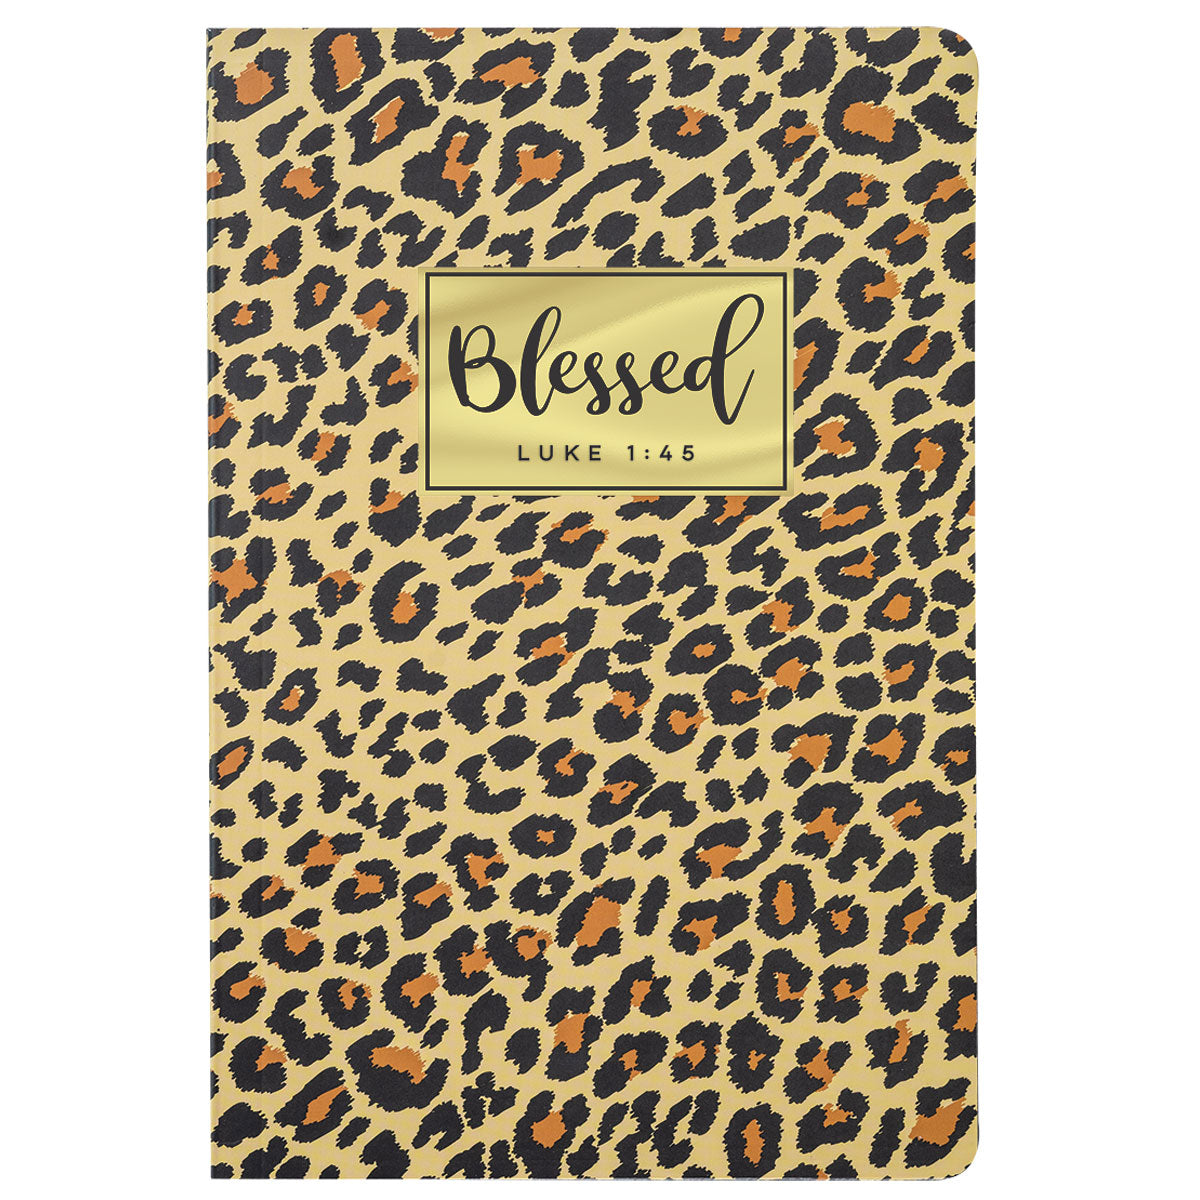 Kerusso Blessed Journal